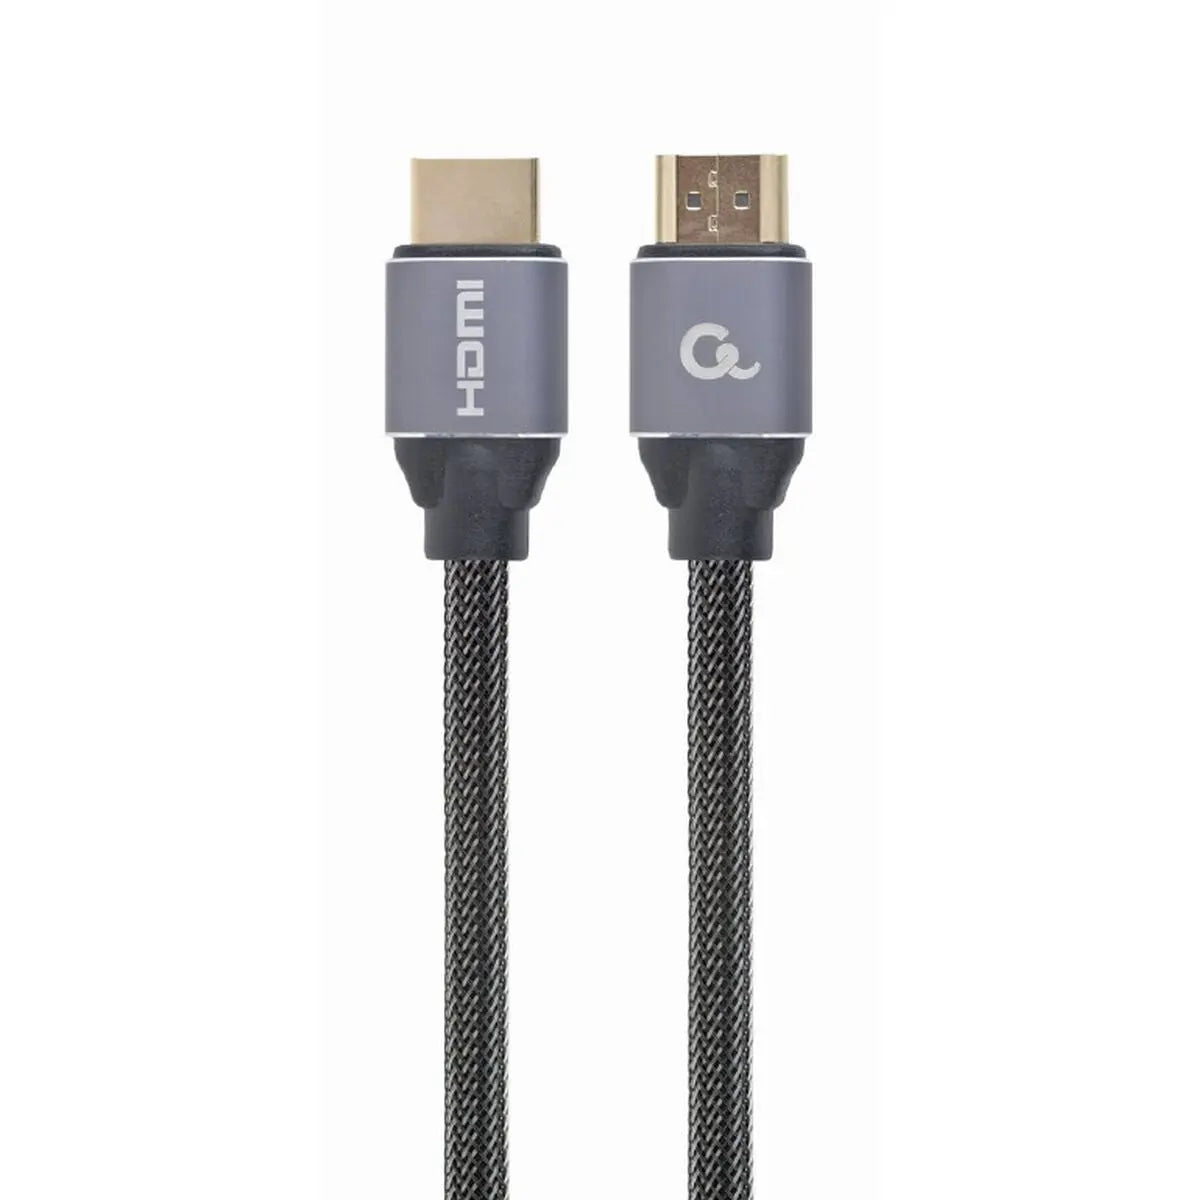 HDMI Cable GEMBIRD CCBP-HDMI-5M Grey 5 m